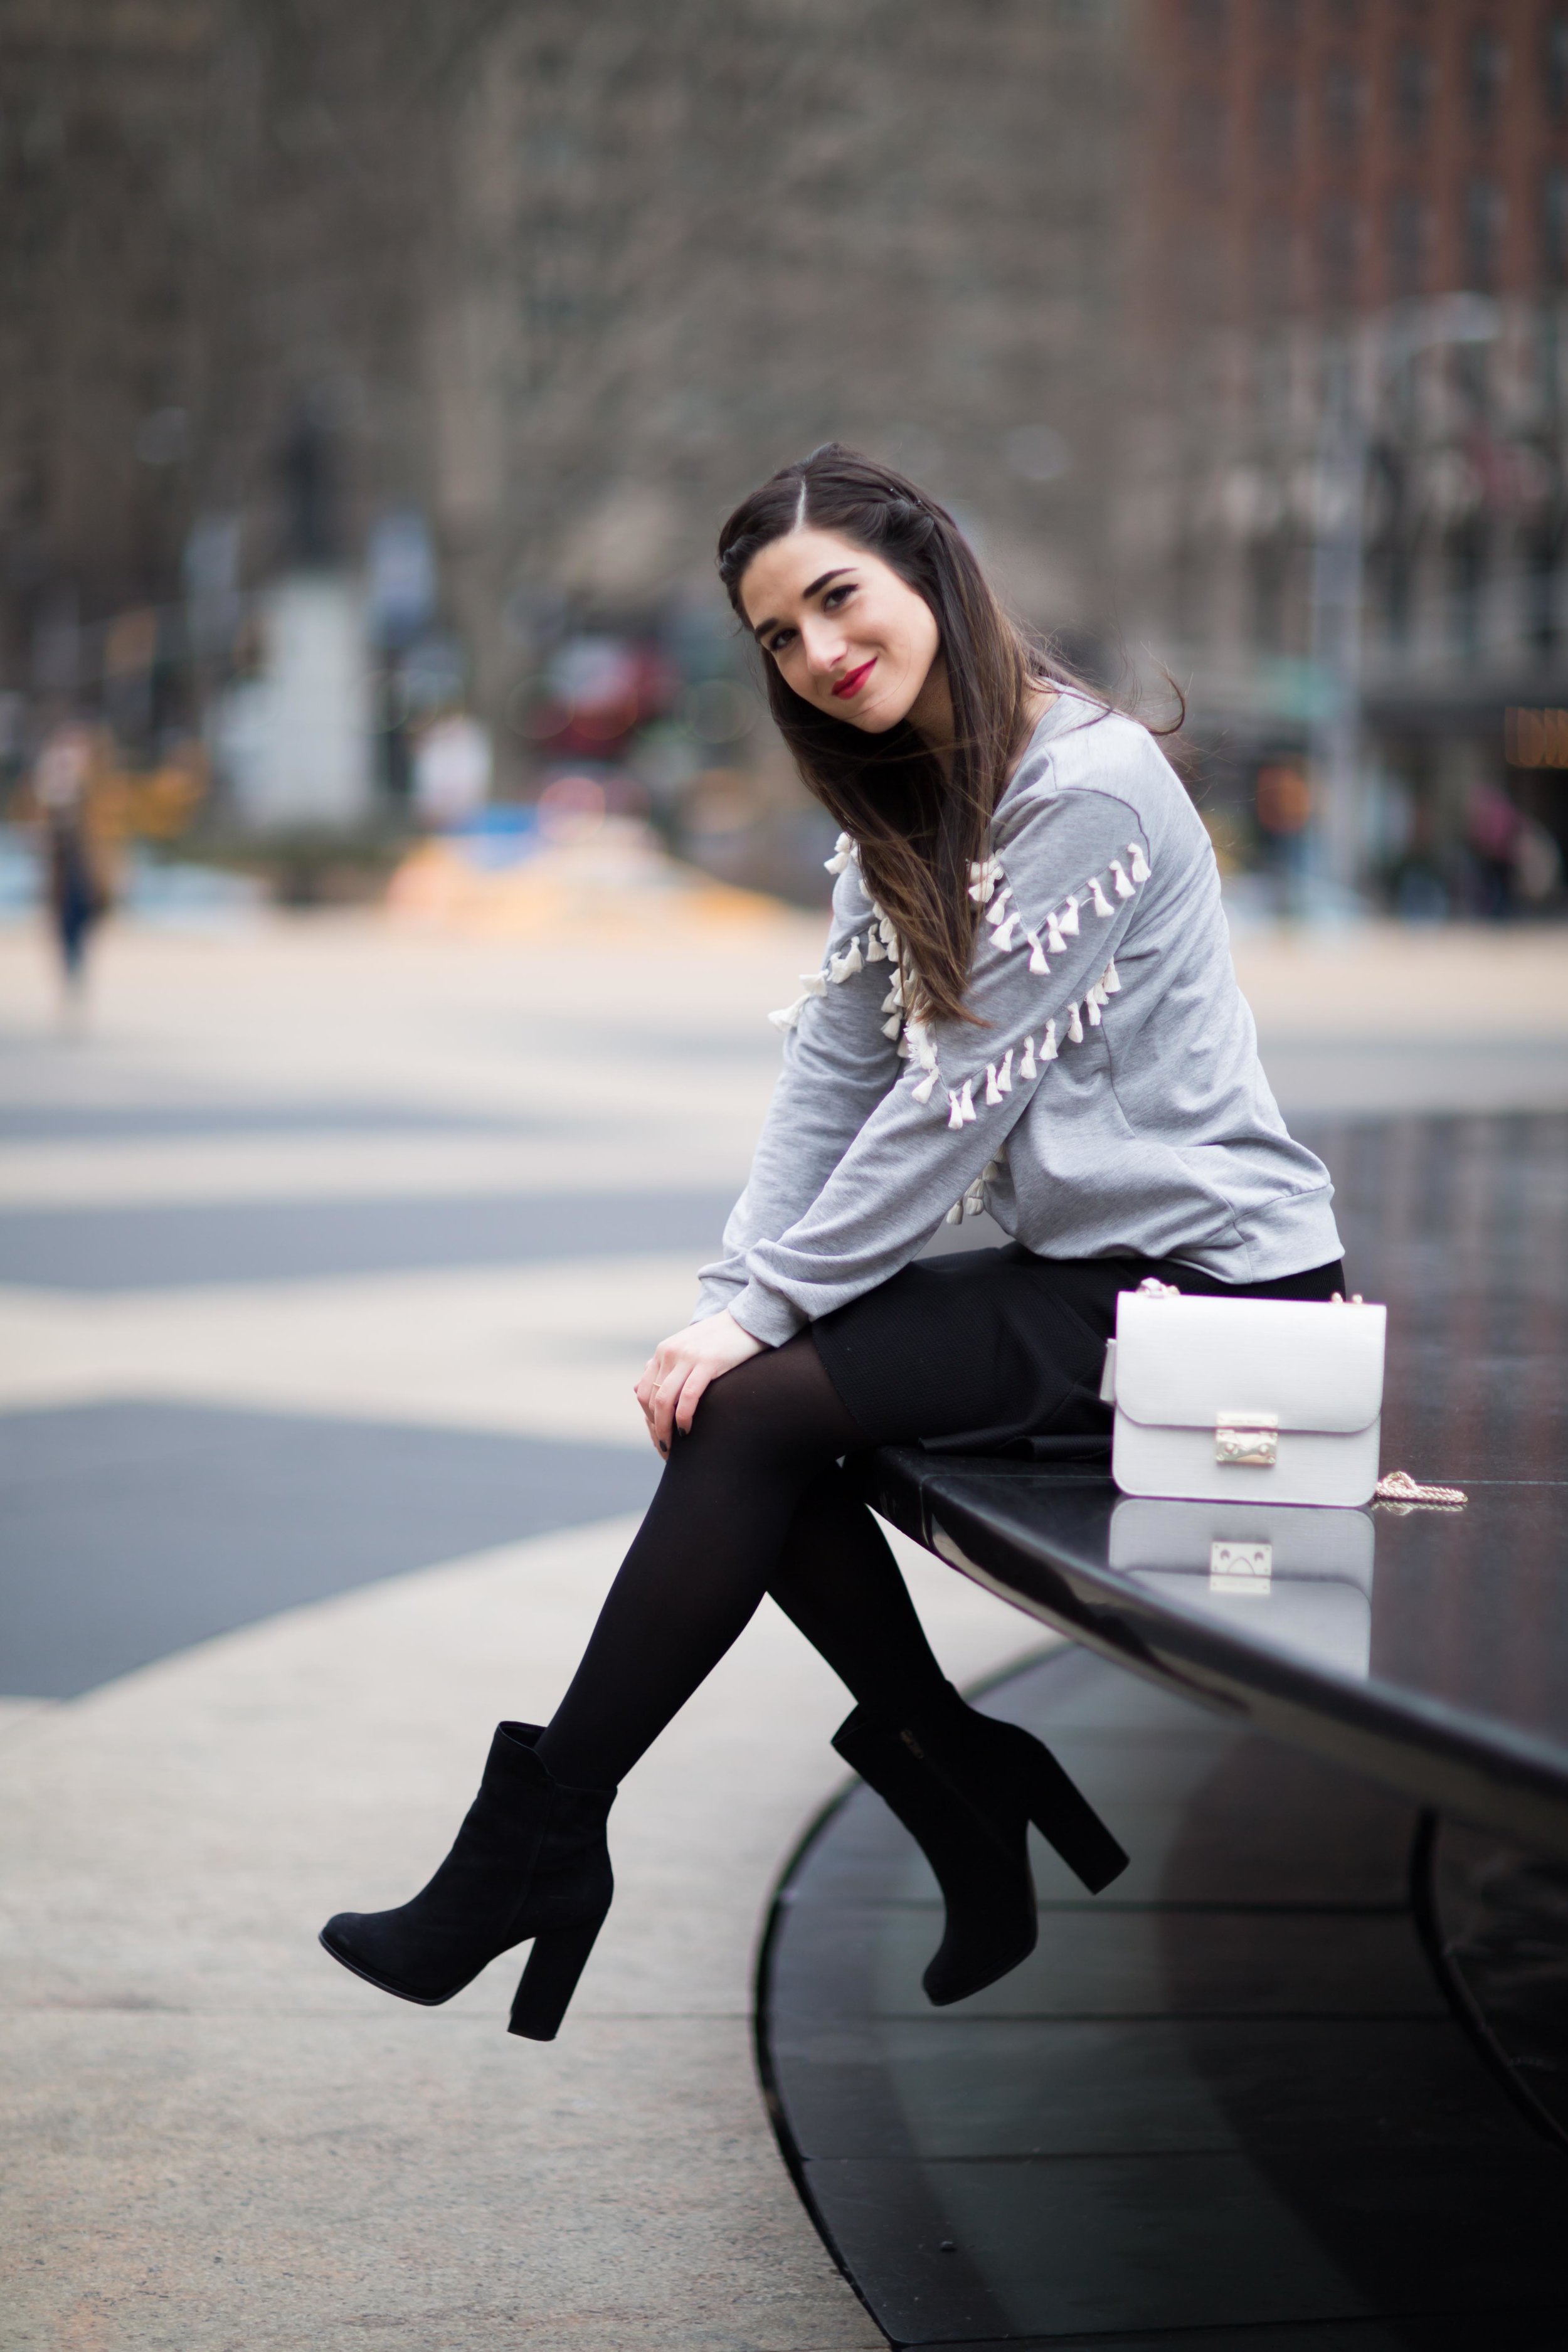 Grey Tassel Sweatshirt Everything You Wanted To Know About Blog Interns Esther Santer Fashion Blog NYC Street Style Blogger Outfit OOTD Trendy Henri Bendel Waldorf Party Bag Black Mini Skirt Booties Shoes Cozy Tights Photoshoot Model Girl Women Hair.jpg